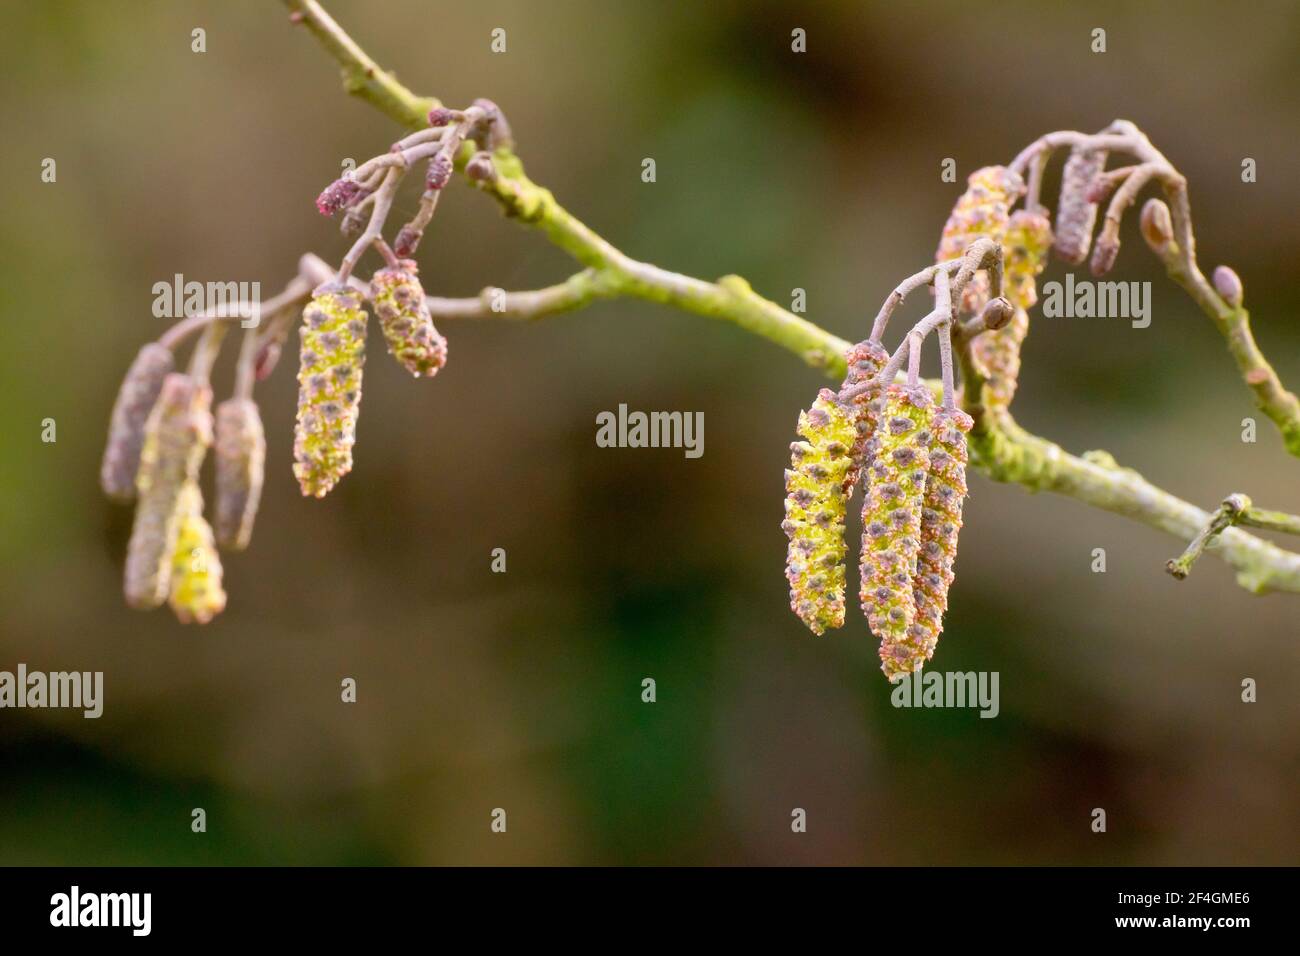 Alder catkins (alnus glutinosa), close up showing several of the large male catkins in flower hanging from a branch of the tree. Stock Photo